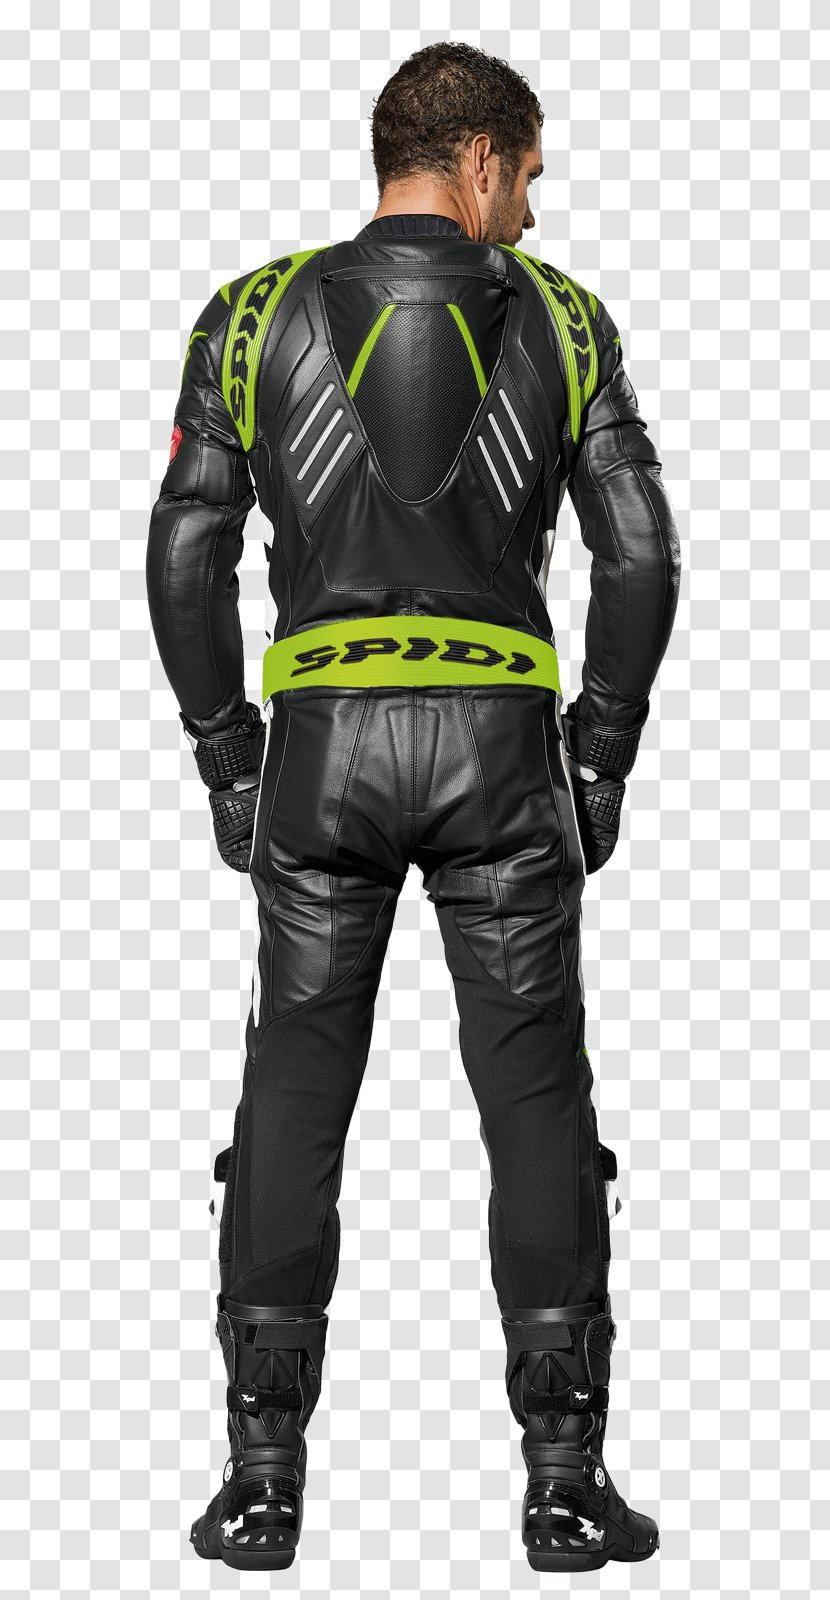 Tracksuit Motorcycle Price Yamaha Motor Company Leather - Boilersuit Transparent PNG